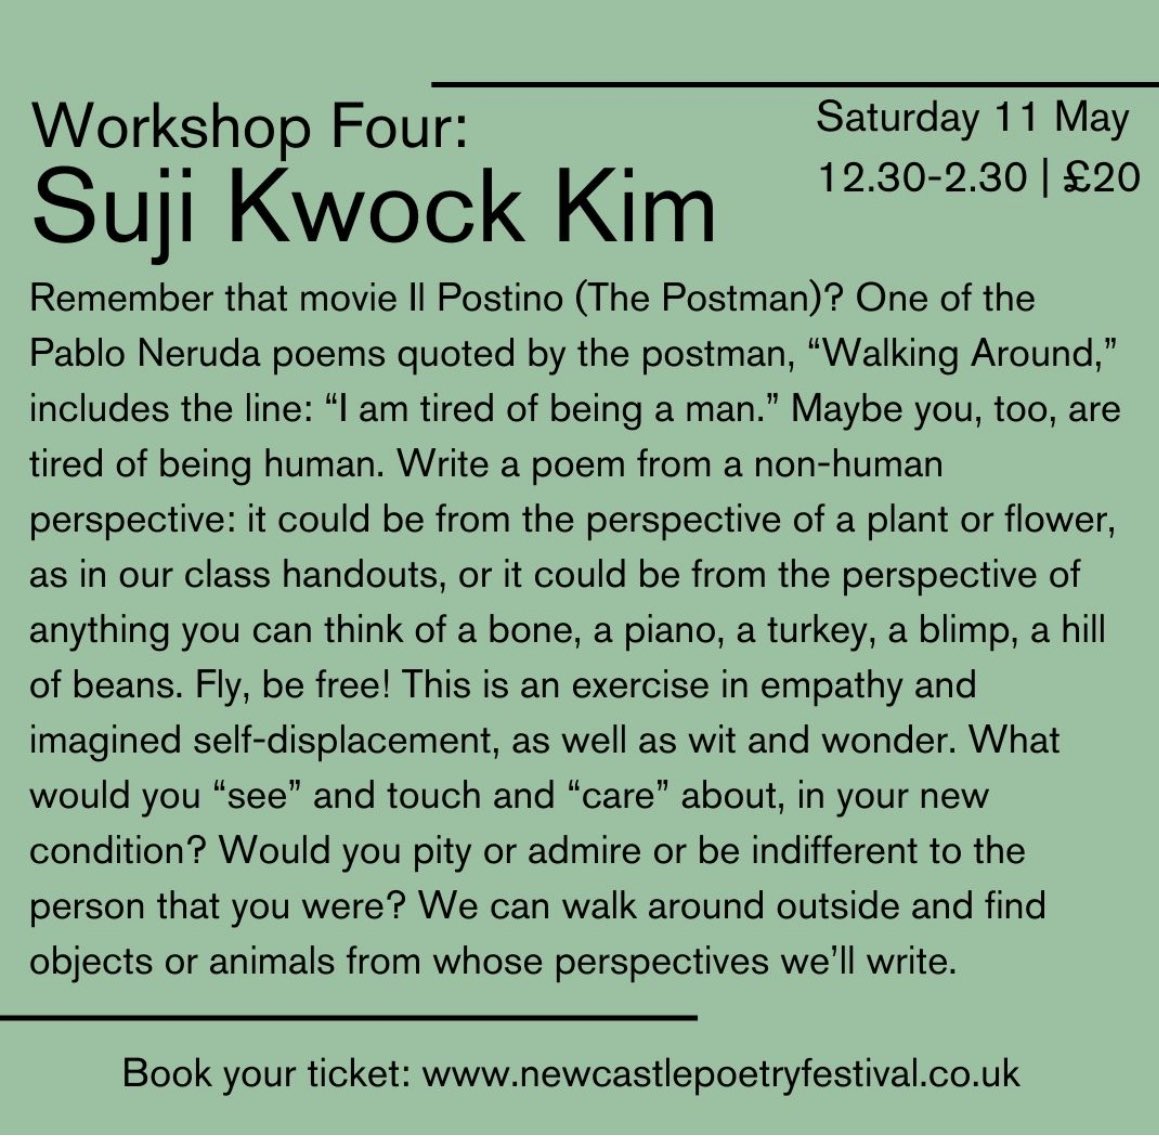 🤓We’re excited about Suji Kwock Kim’s workshop ‘Eco-poems & non-human perspectives’ 💚🌲on Sat 11 May 12.30-2.30 📝#NPFP24 Booking info 🎫newcastlepoetryfestival.co.uk